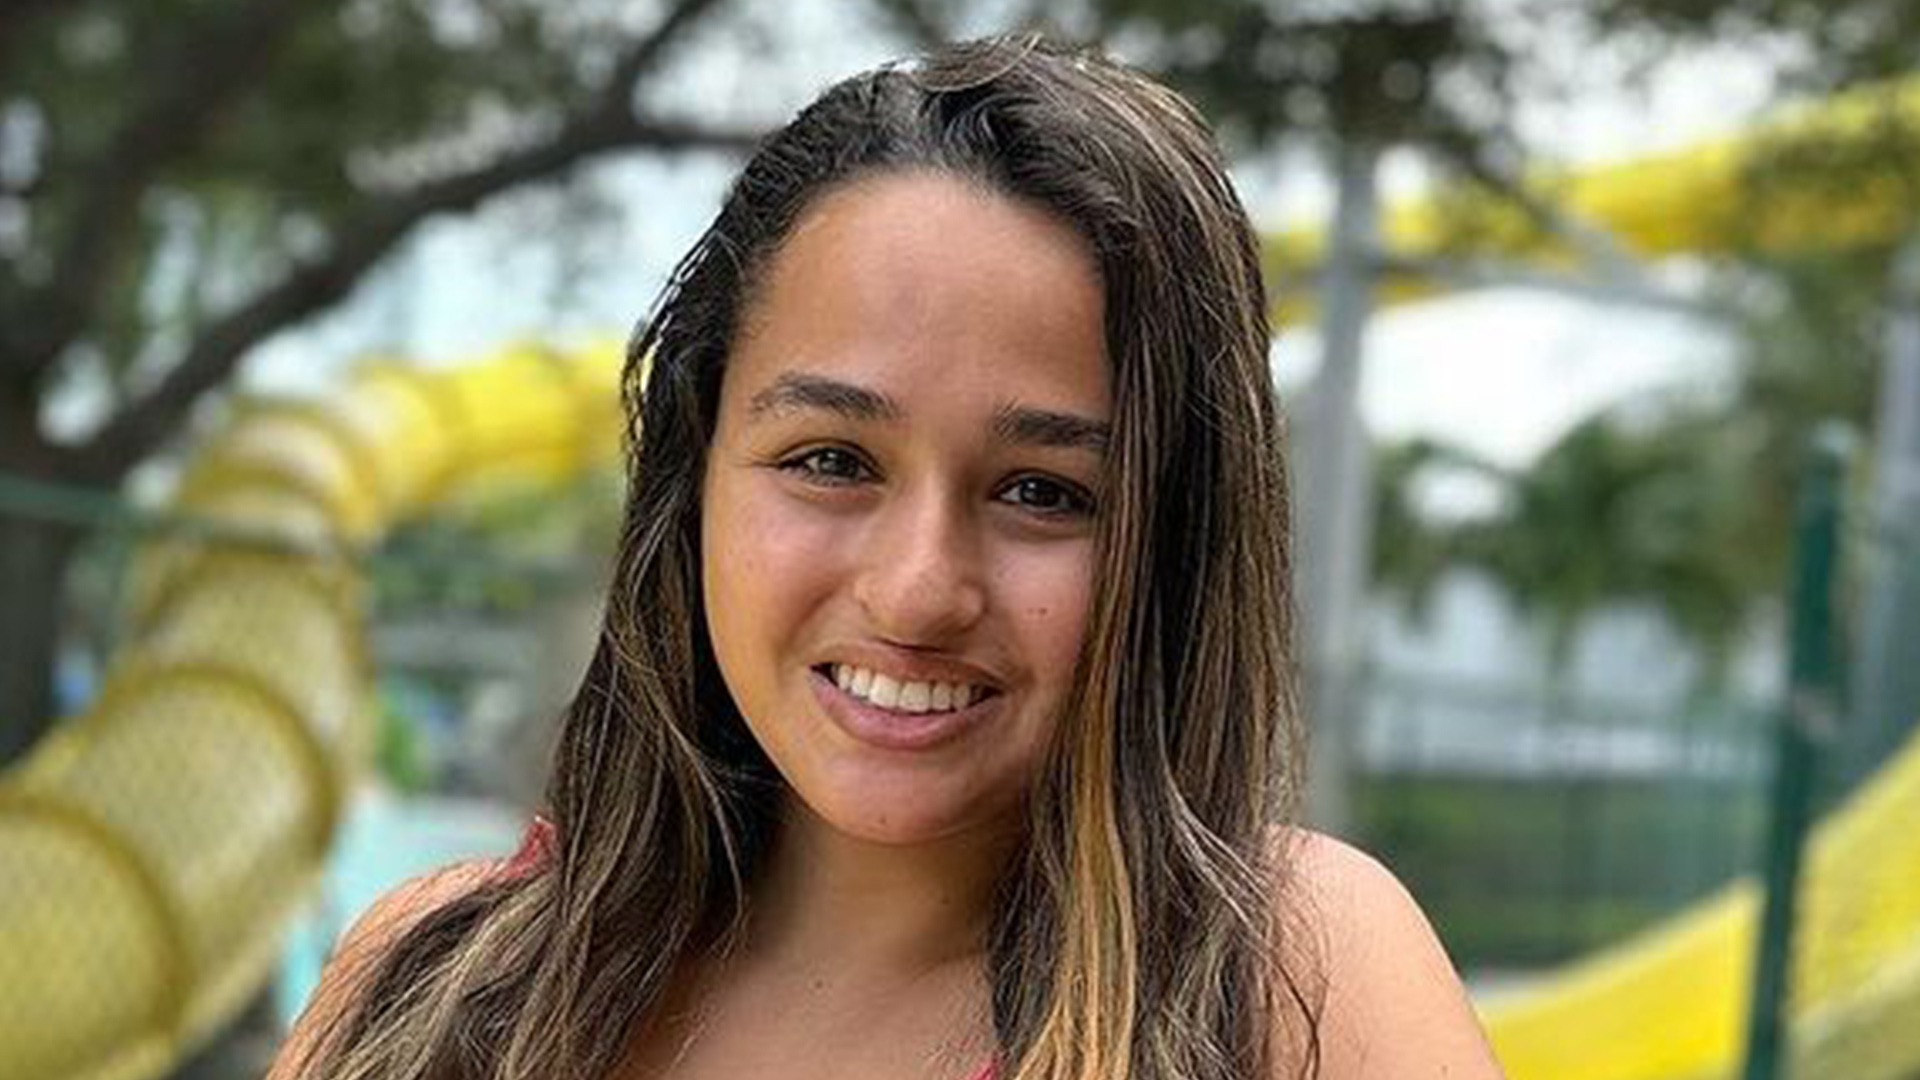 Jazz Jennings, I Am Jazz’s star, proudly displays her curves with a plunging pink bathing suit after dramatic weight loss